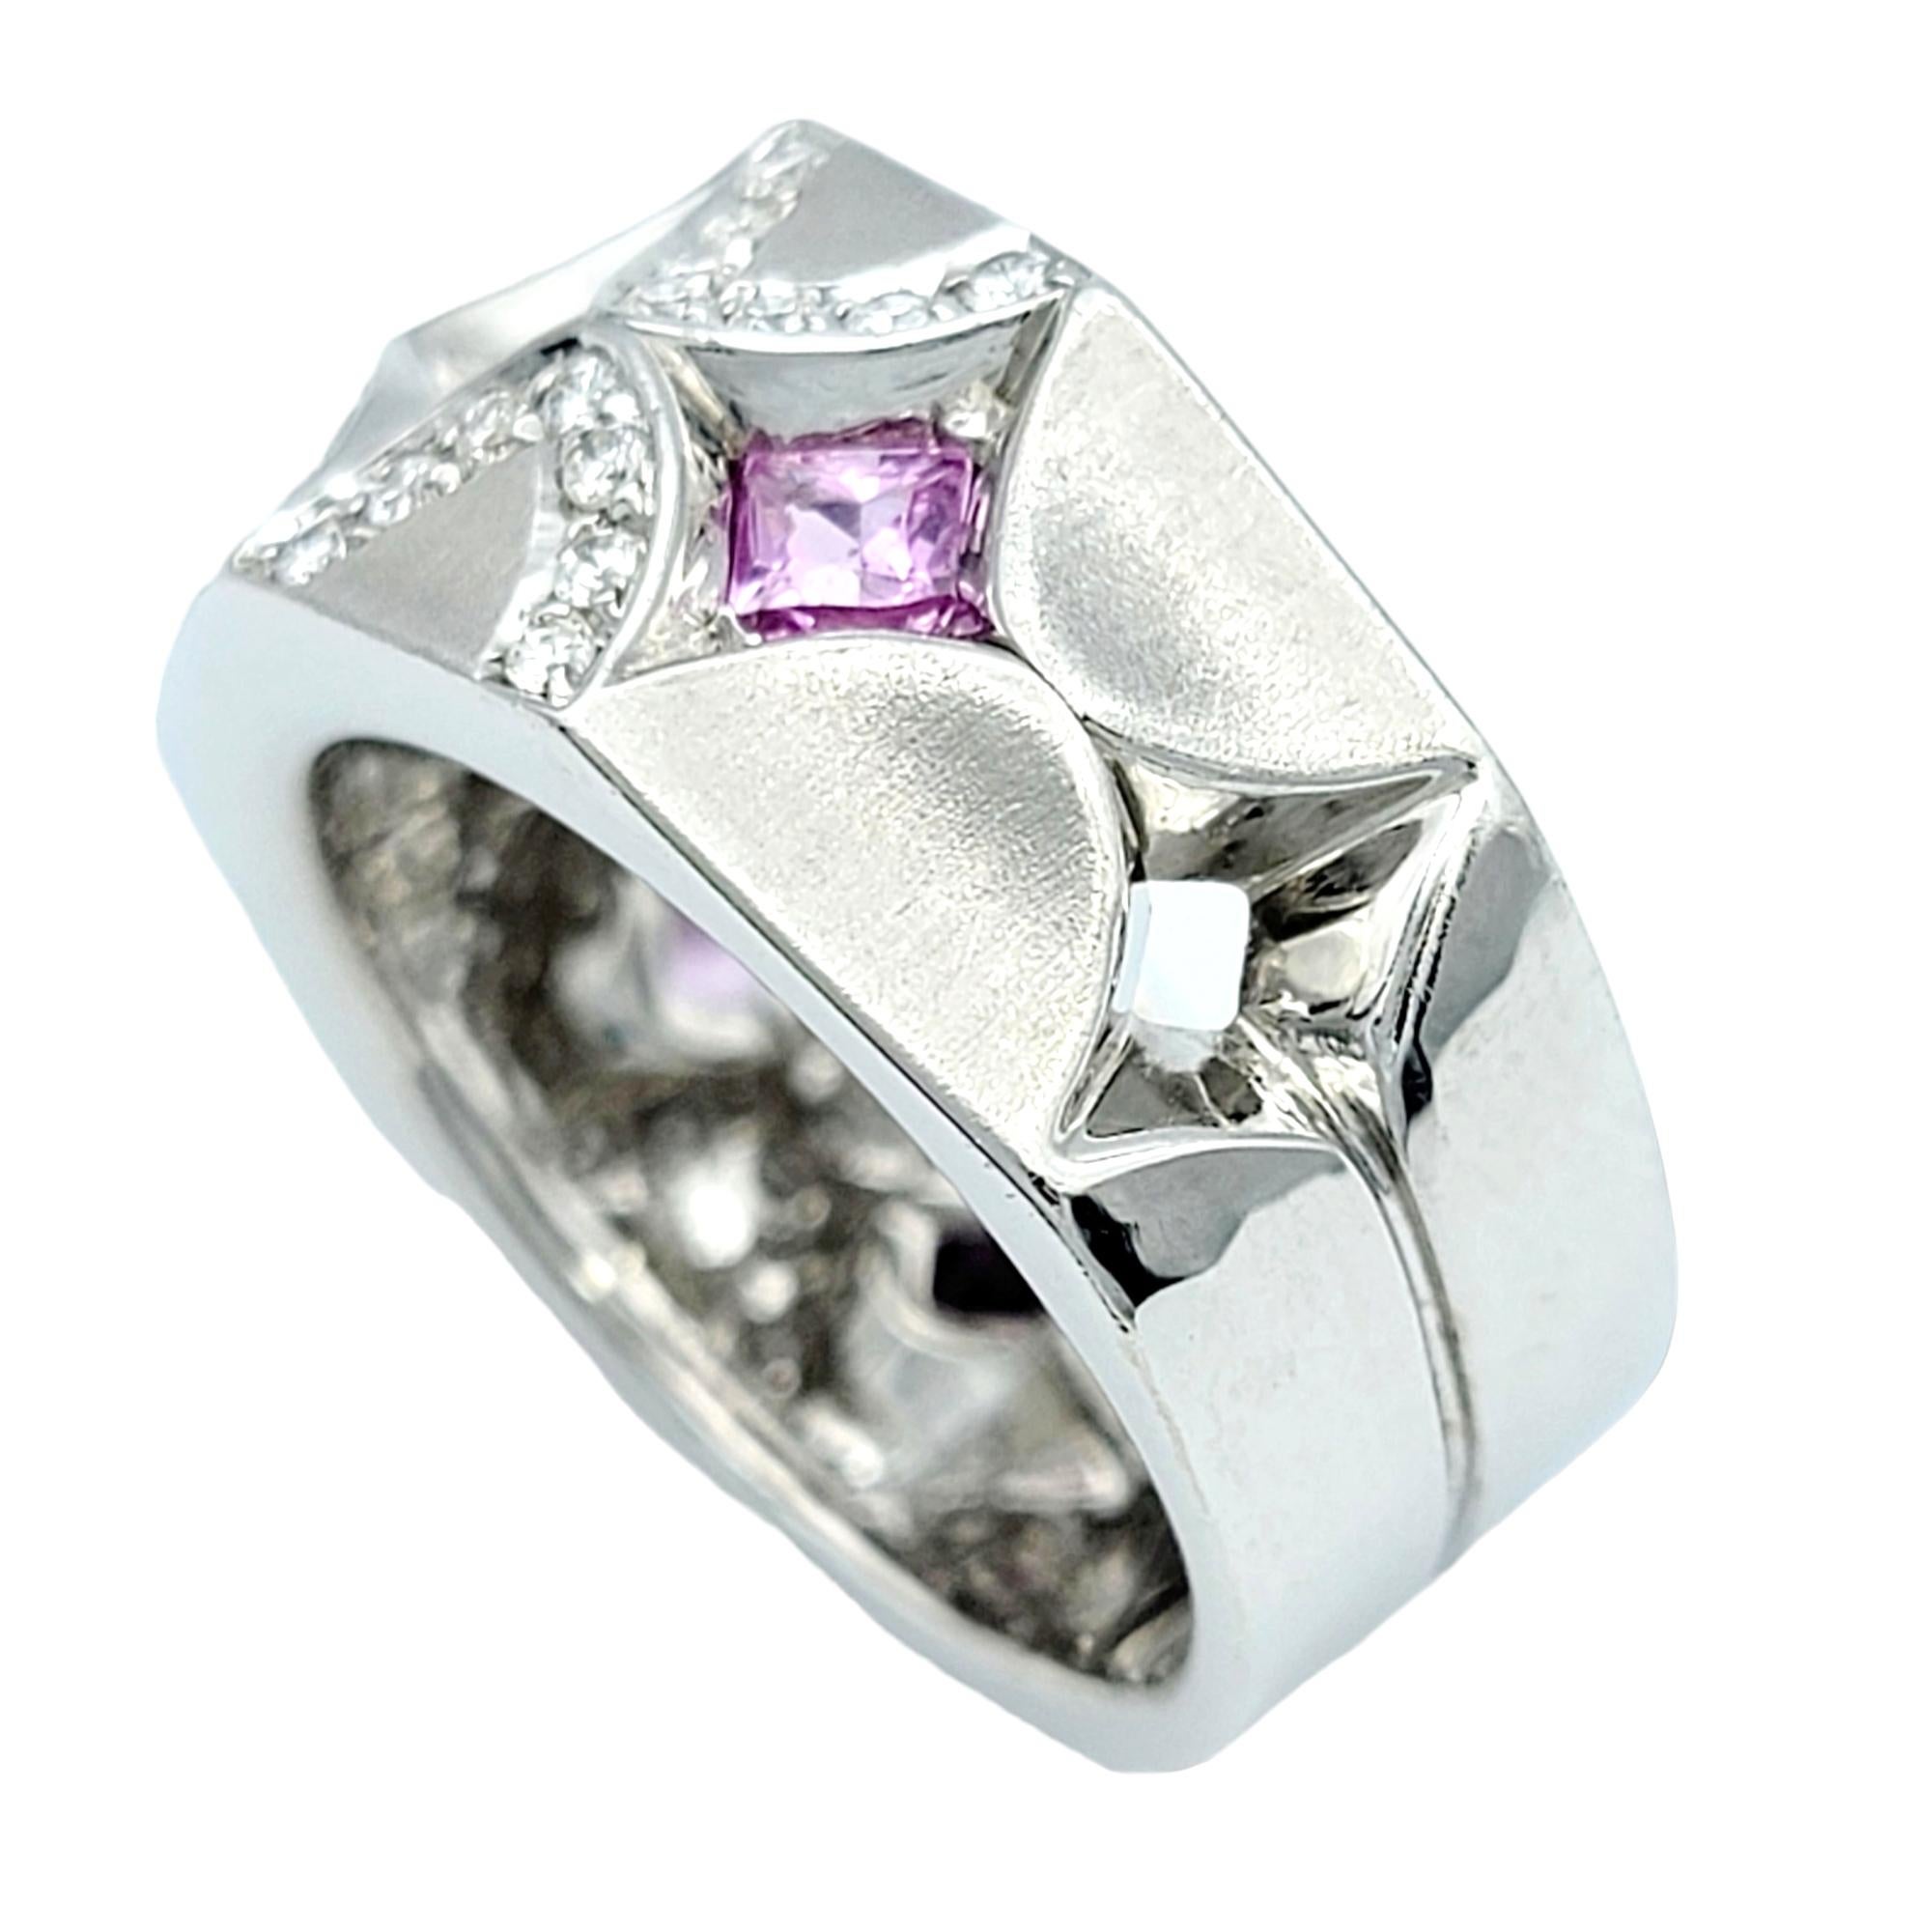 Princess-Cut Pink Sapphire and Diamond Band Ring in Brushed 18 Karat White Gold In Good Condition For Sale In Scottsdale, AZ